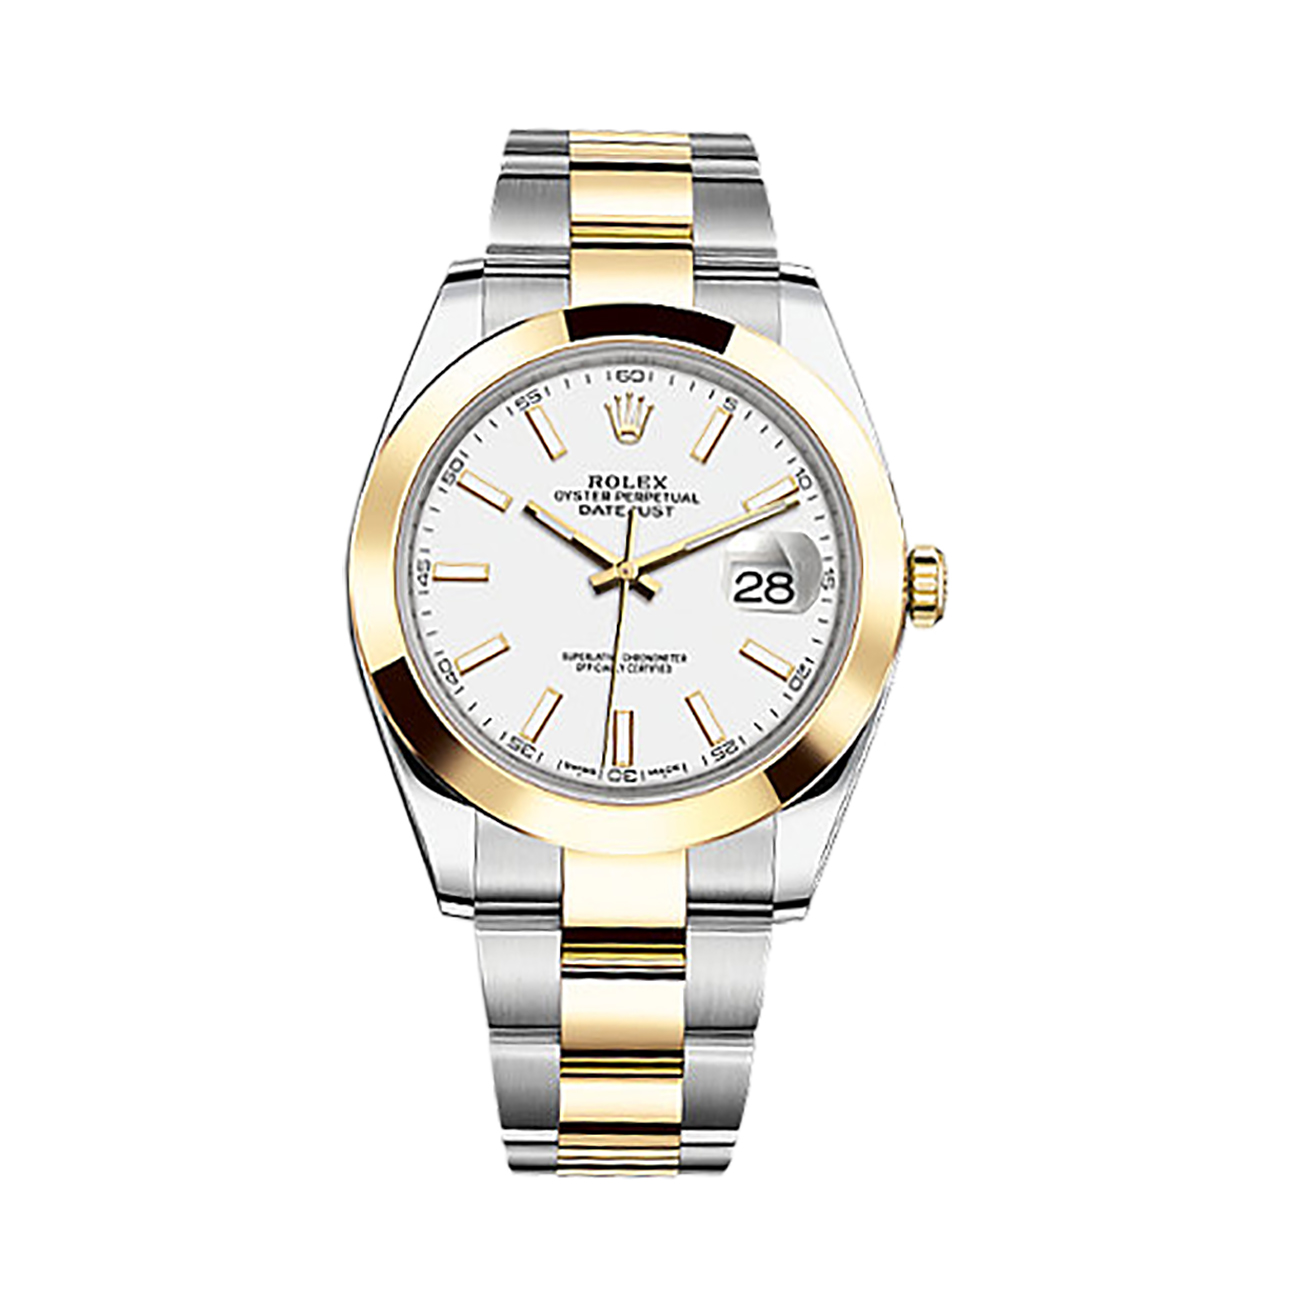 Datejust 41 126303 Gold & Stainless Steel Watch (White)